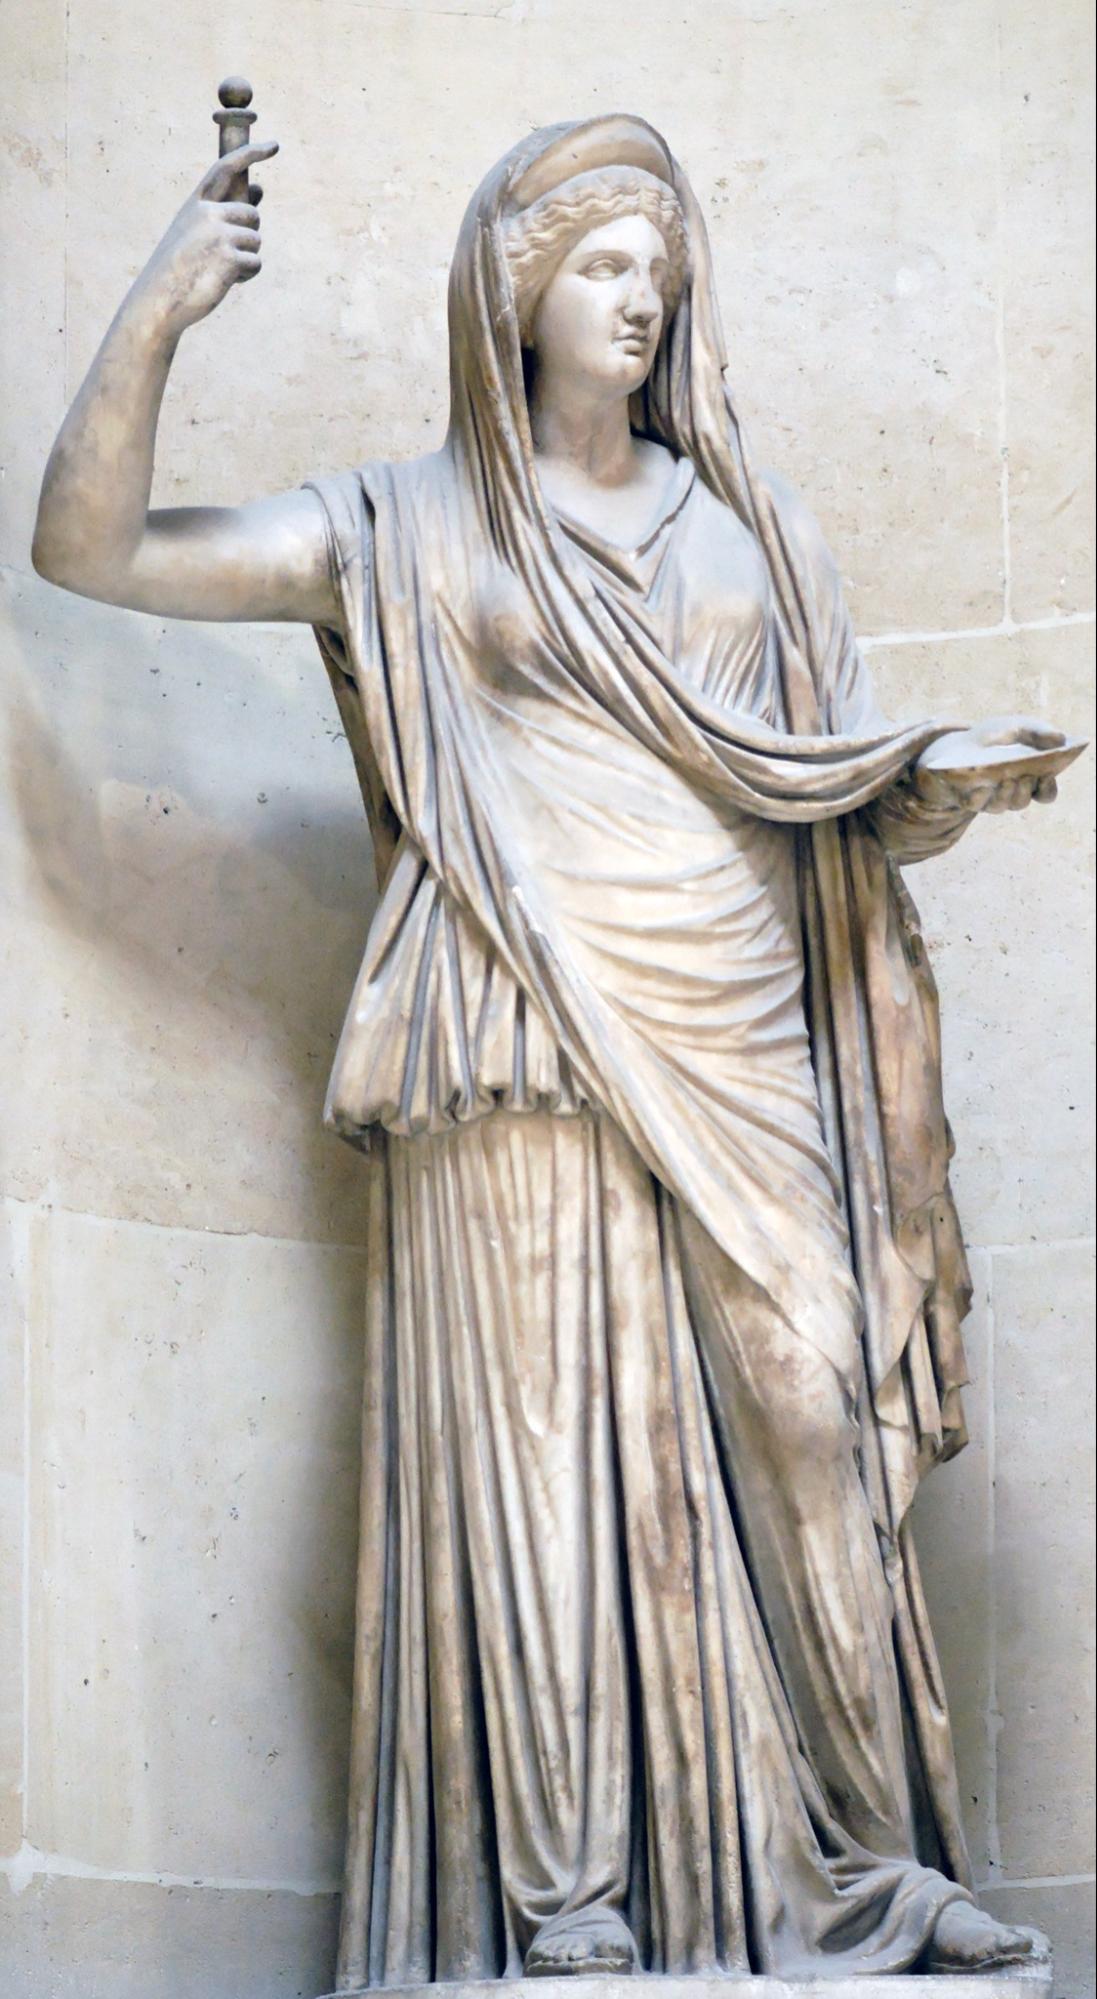 A marble statue of someone wearing a toga.